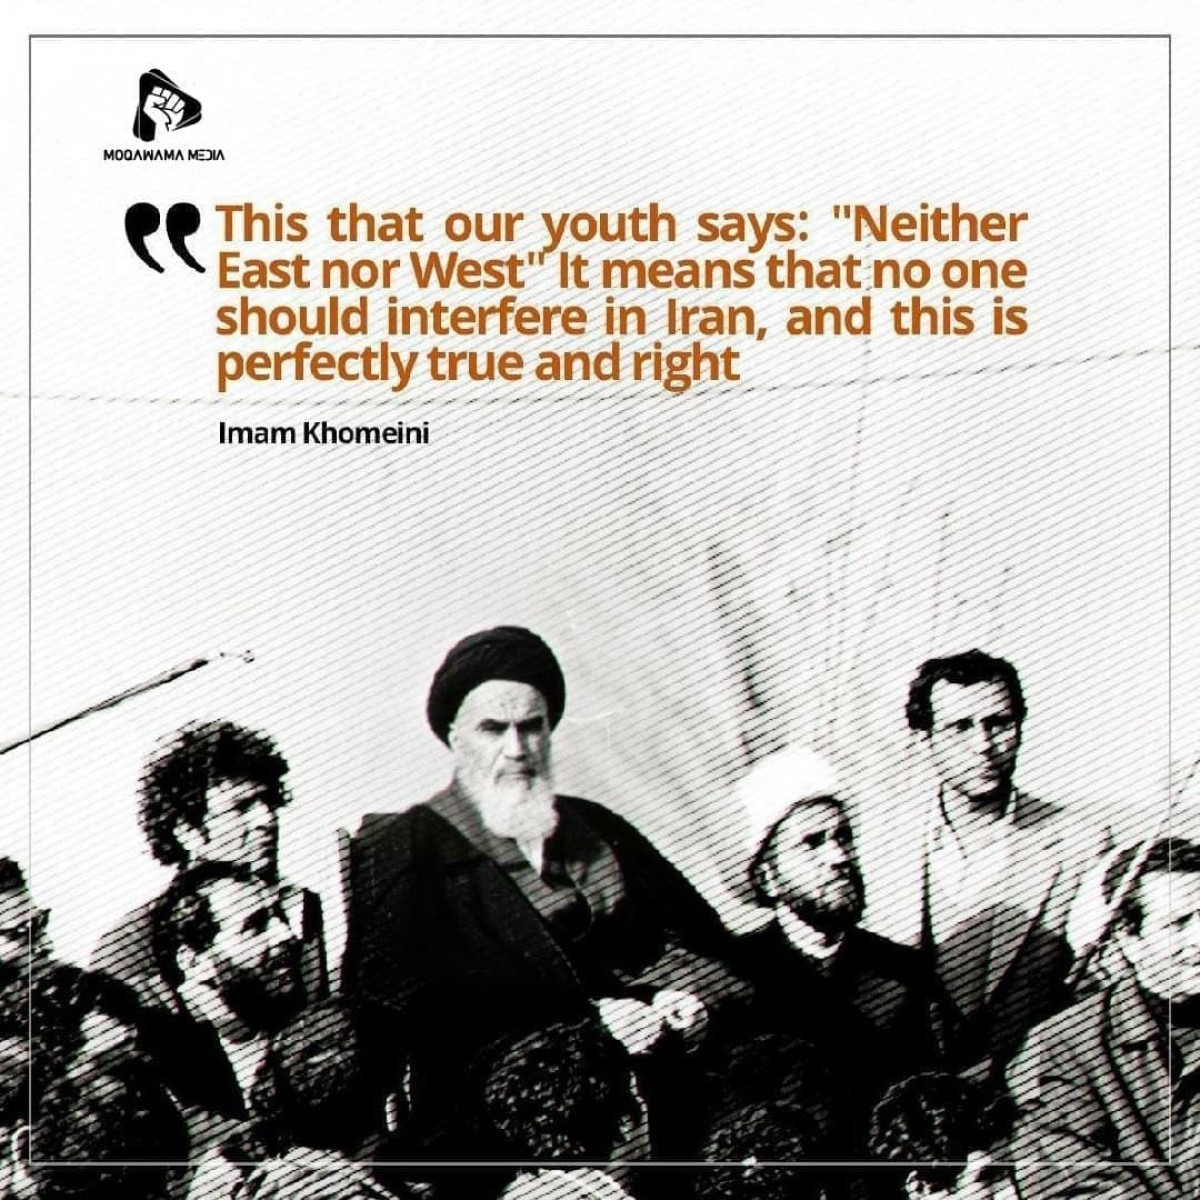 This that our youth says:"Neither East nor West"